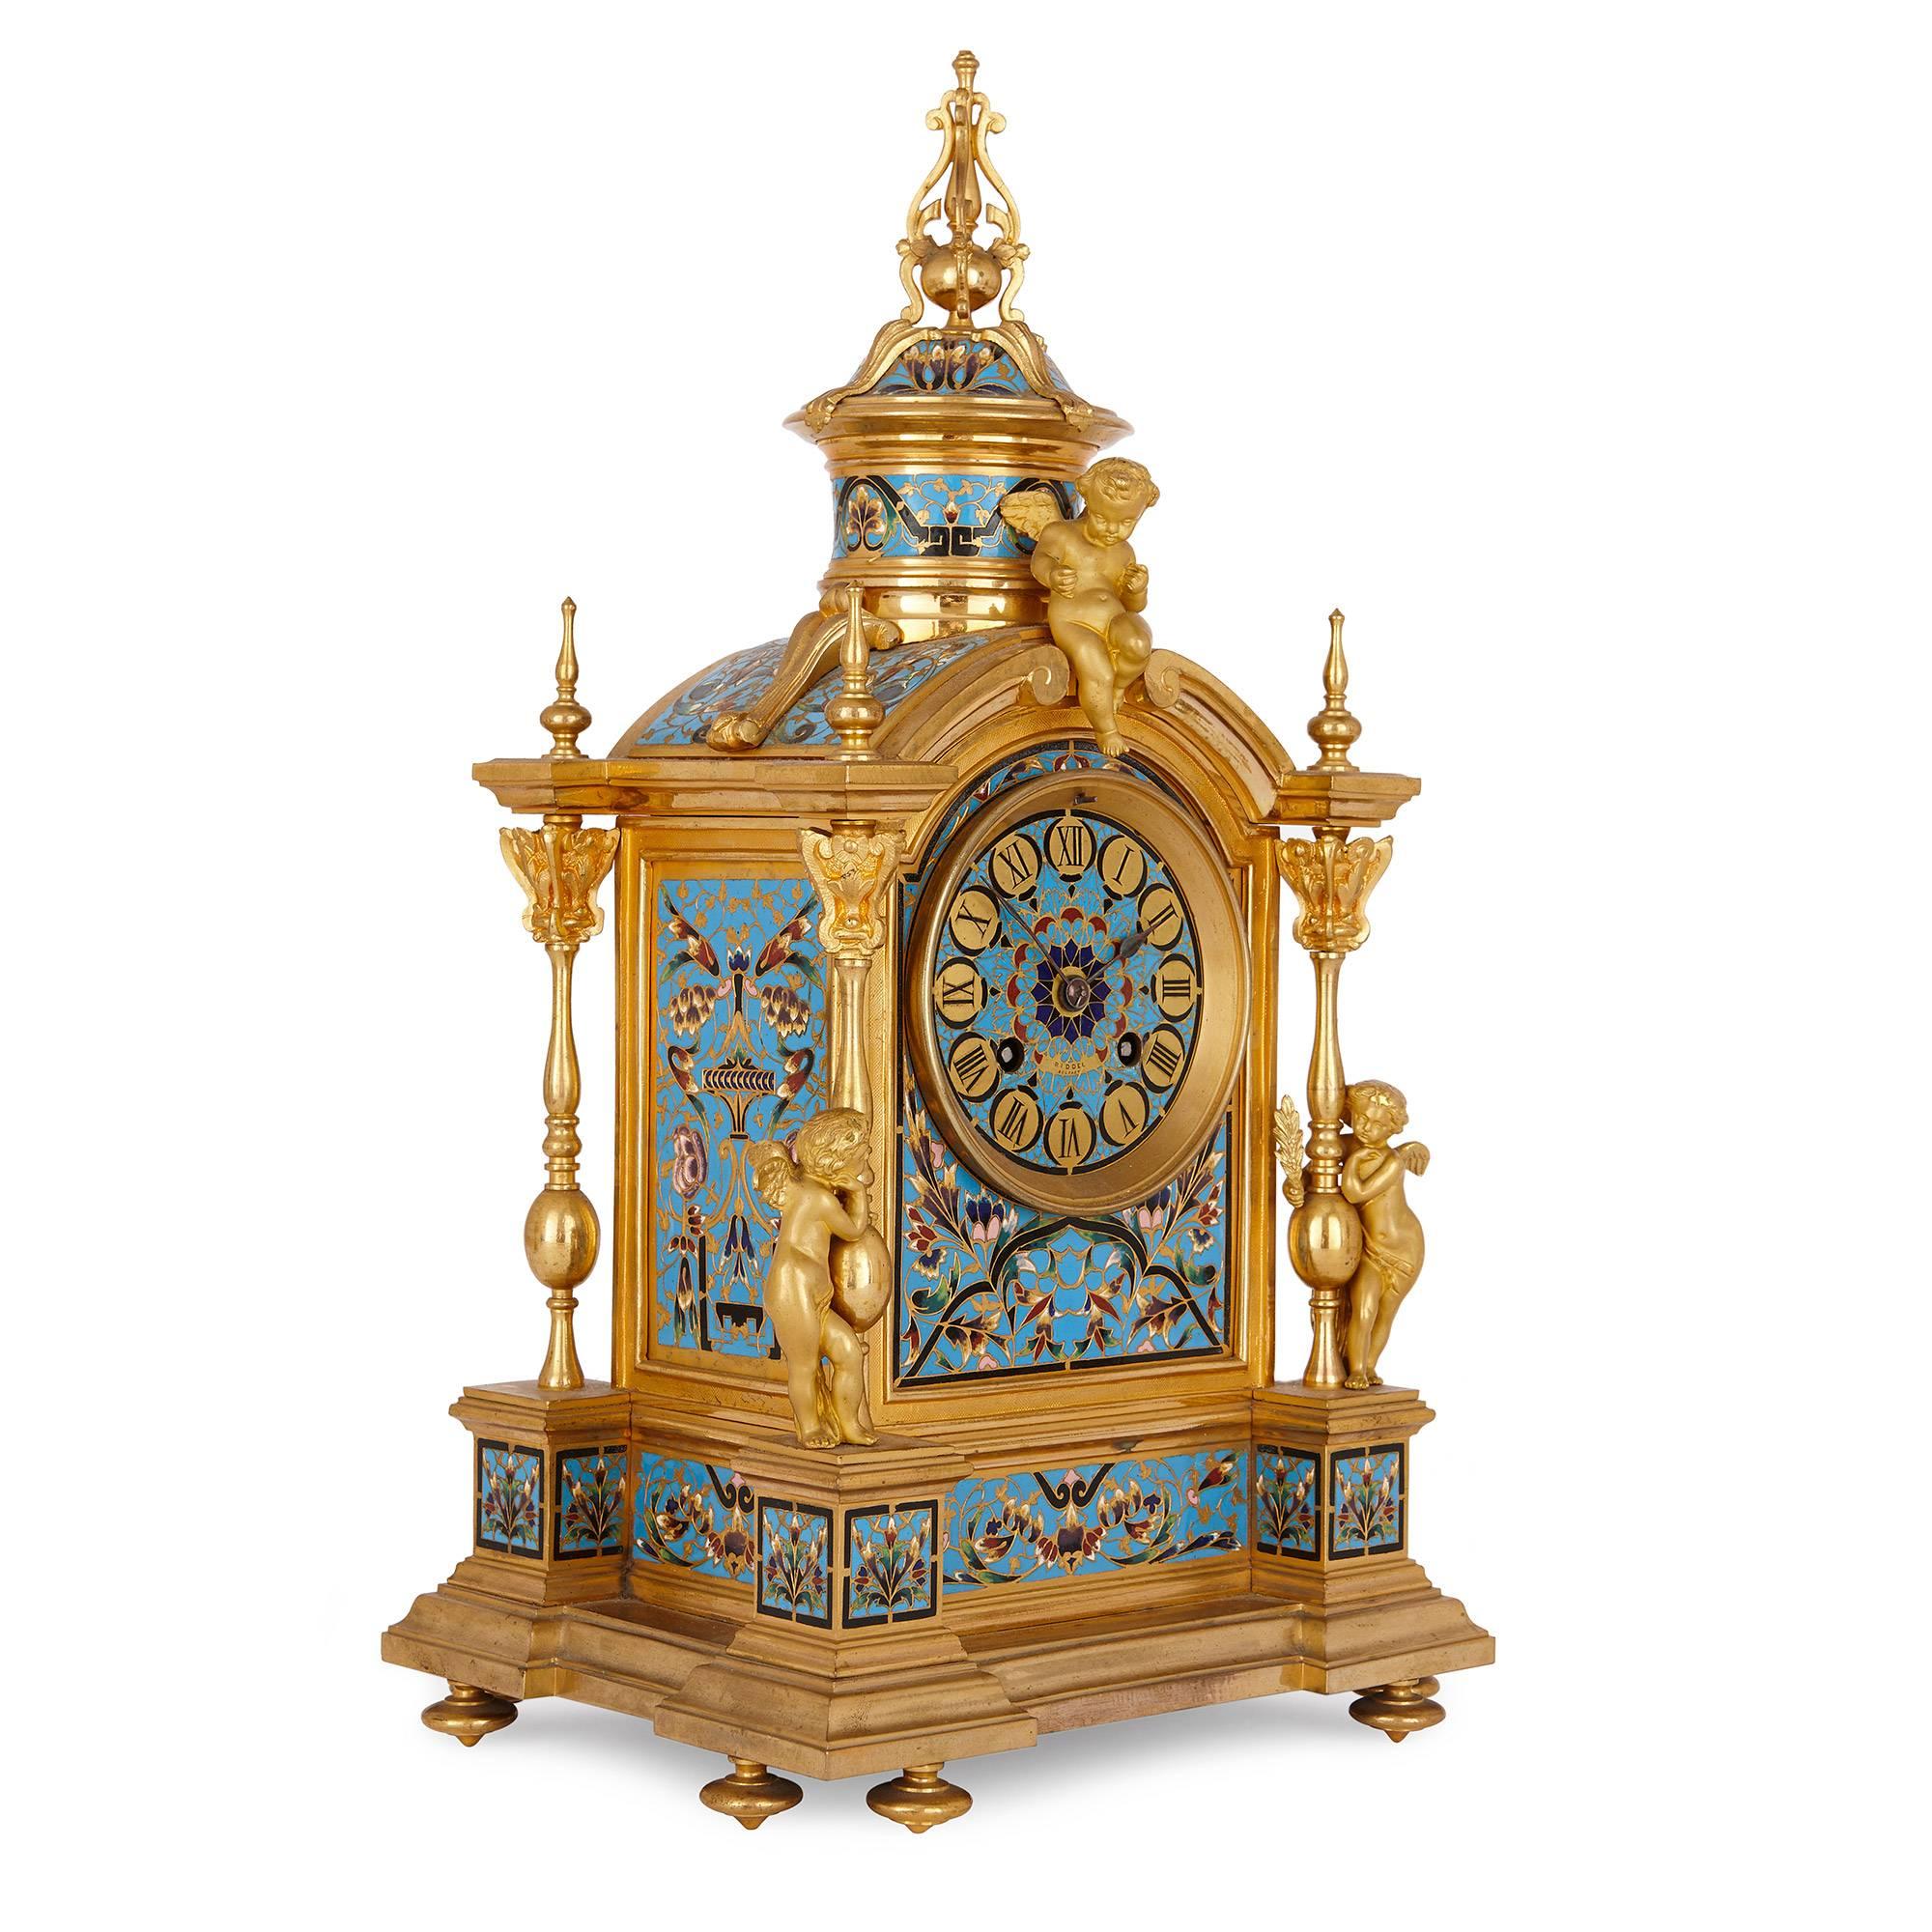 This exceptionally detailed clock set consists of a mantel clock and a pair of accompanying vases, which are all crafted in ormolu and extensively decorated in vibrant cloisonné enamel. The clock sits on ormolu toupie feet upon which is set the